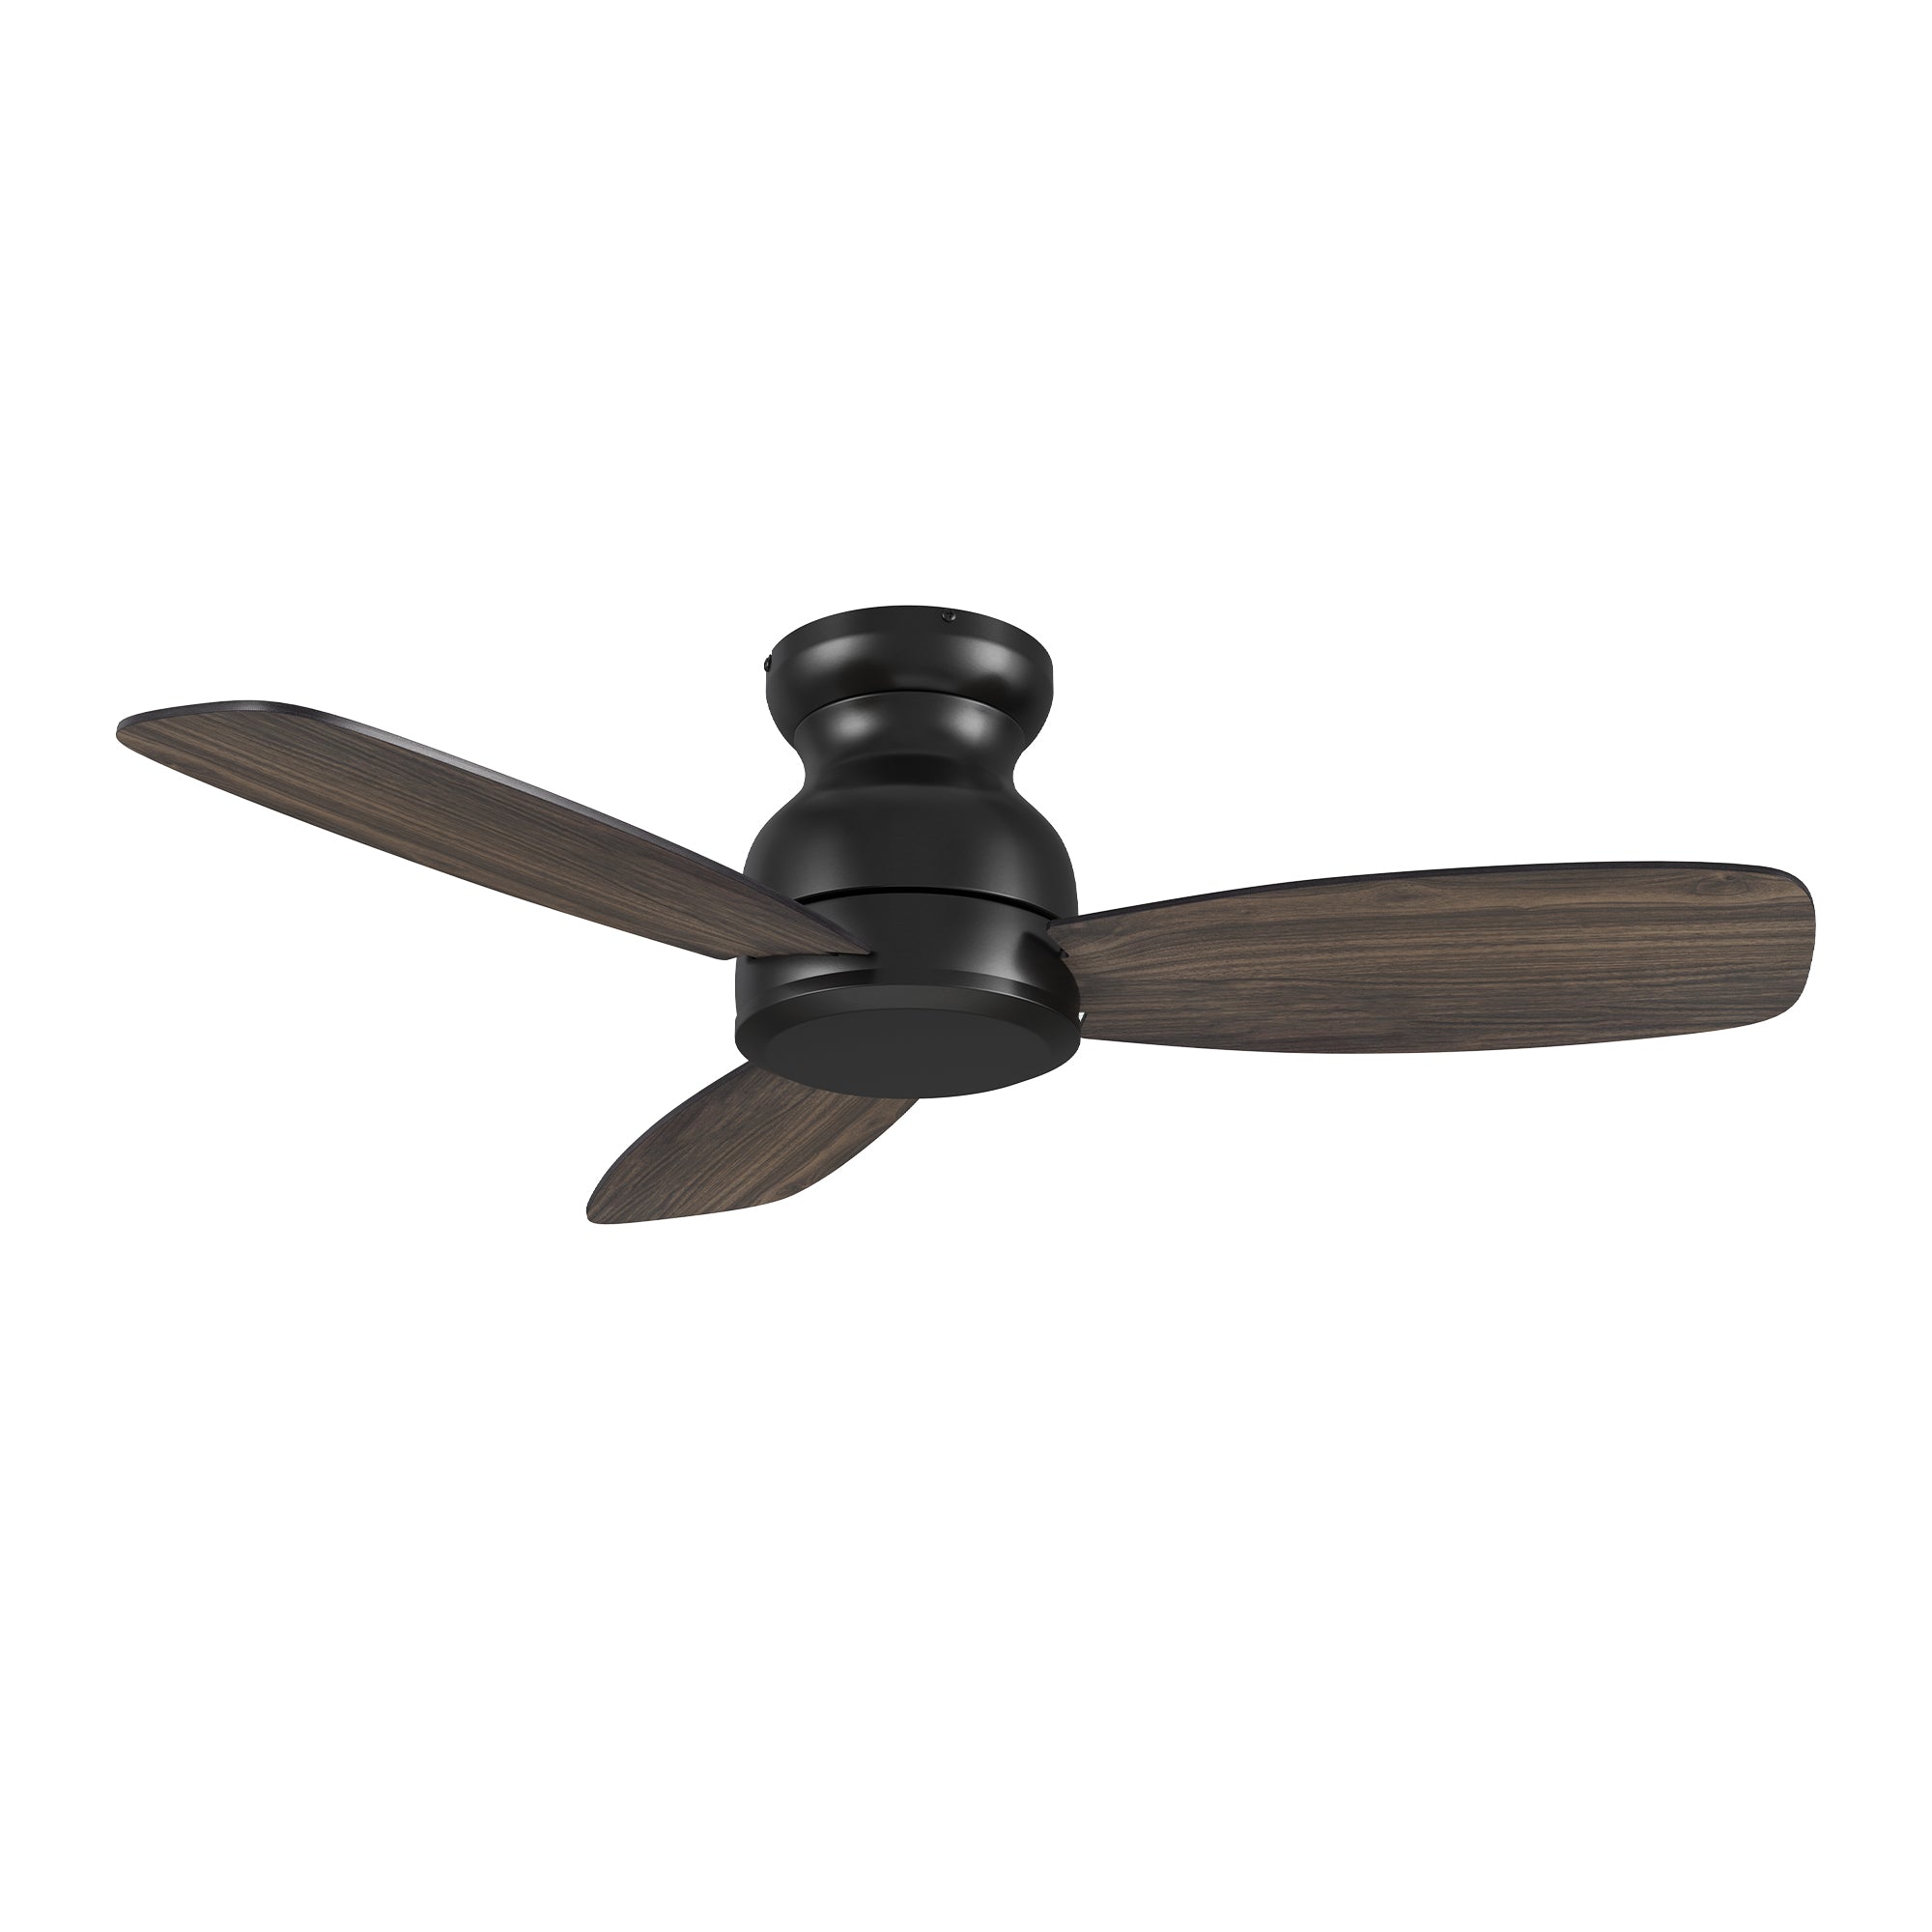 Enjoy a cooling breeze and relaxing controling in an elegant space with the Smafan Osborn 44 inch indoor ceiling fan. The fan is equipped with the latest motor and controling technology with a stylish exterior to suit the décor of your preference. The fan features a charming wood / white finish and sleek blades to cooling up your indoor living spaces. #color_Wood